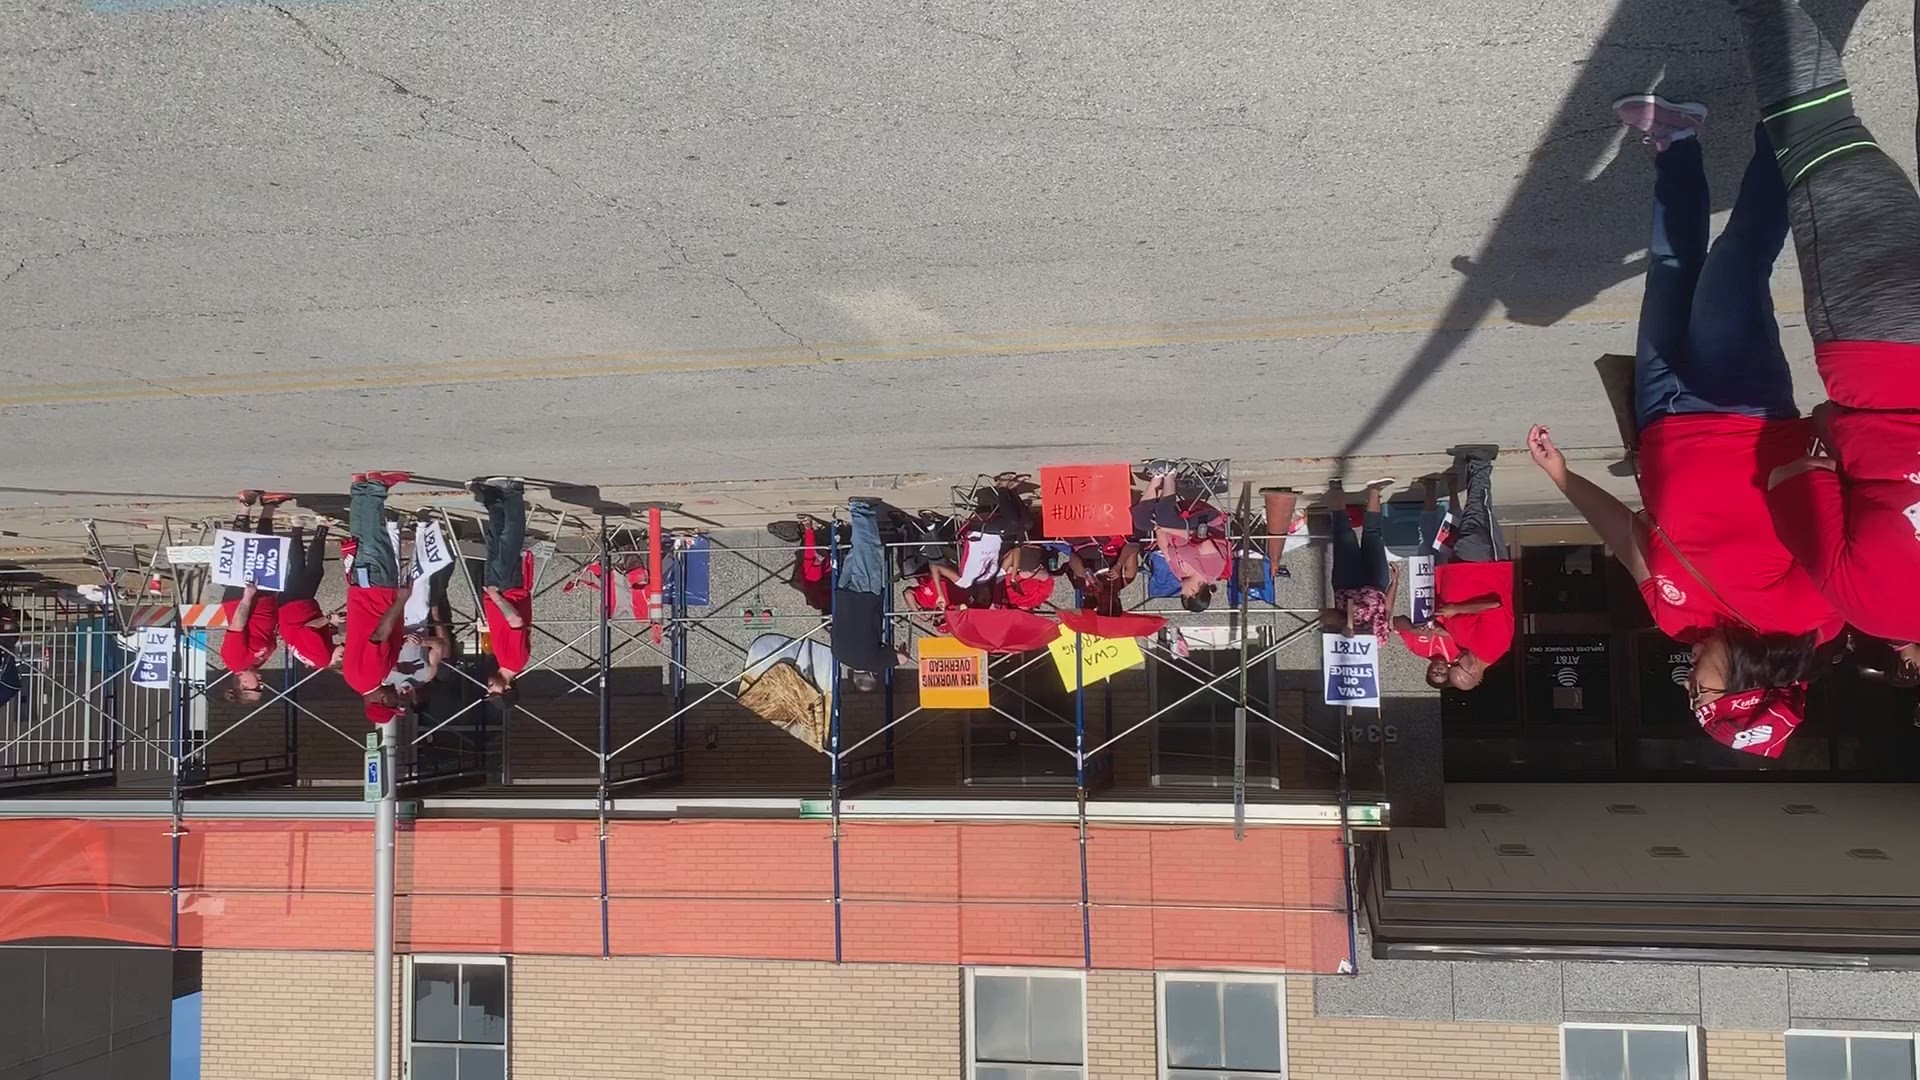 In Louisville, we're told at least 900 are expected to picket at the AT&T central office on Frey’s Hill Road.